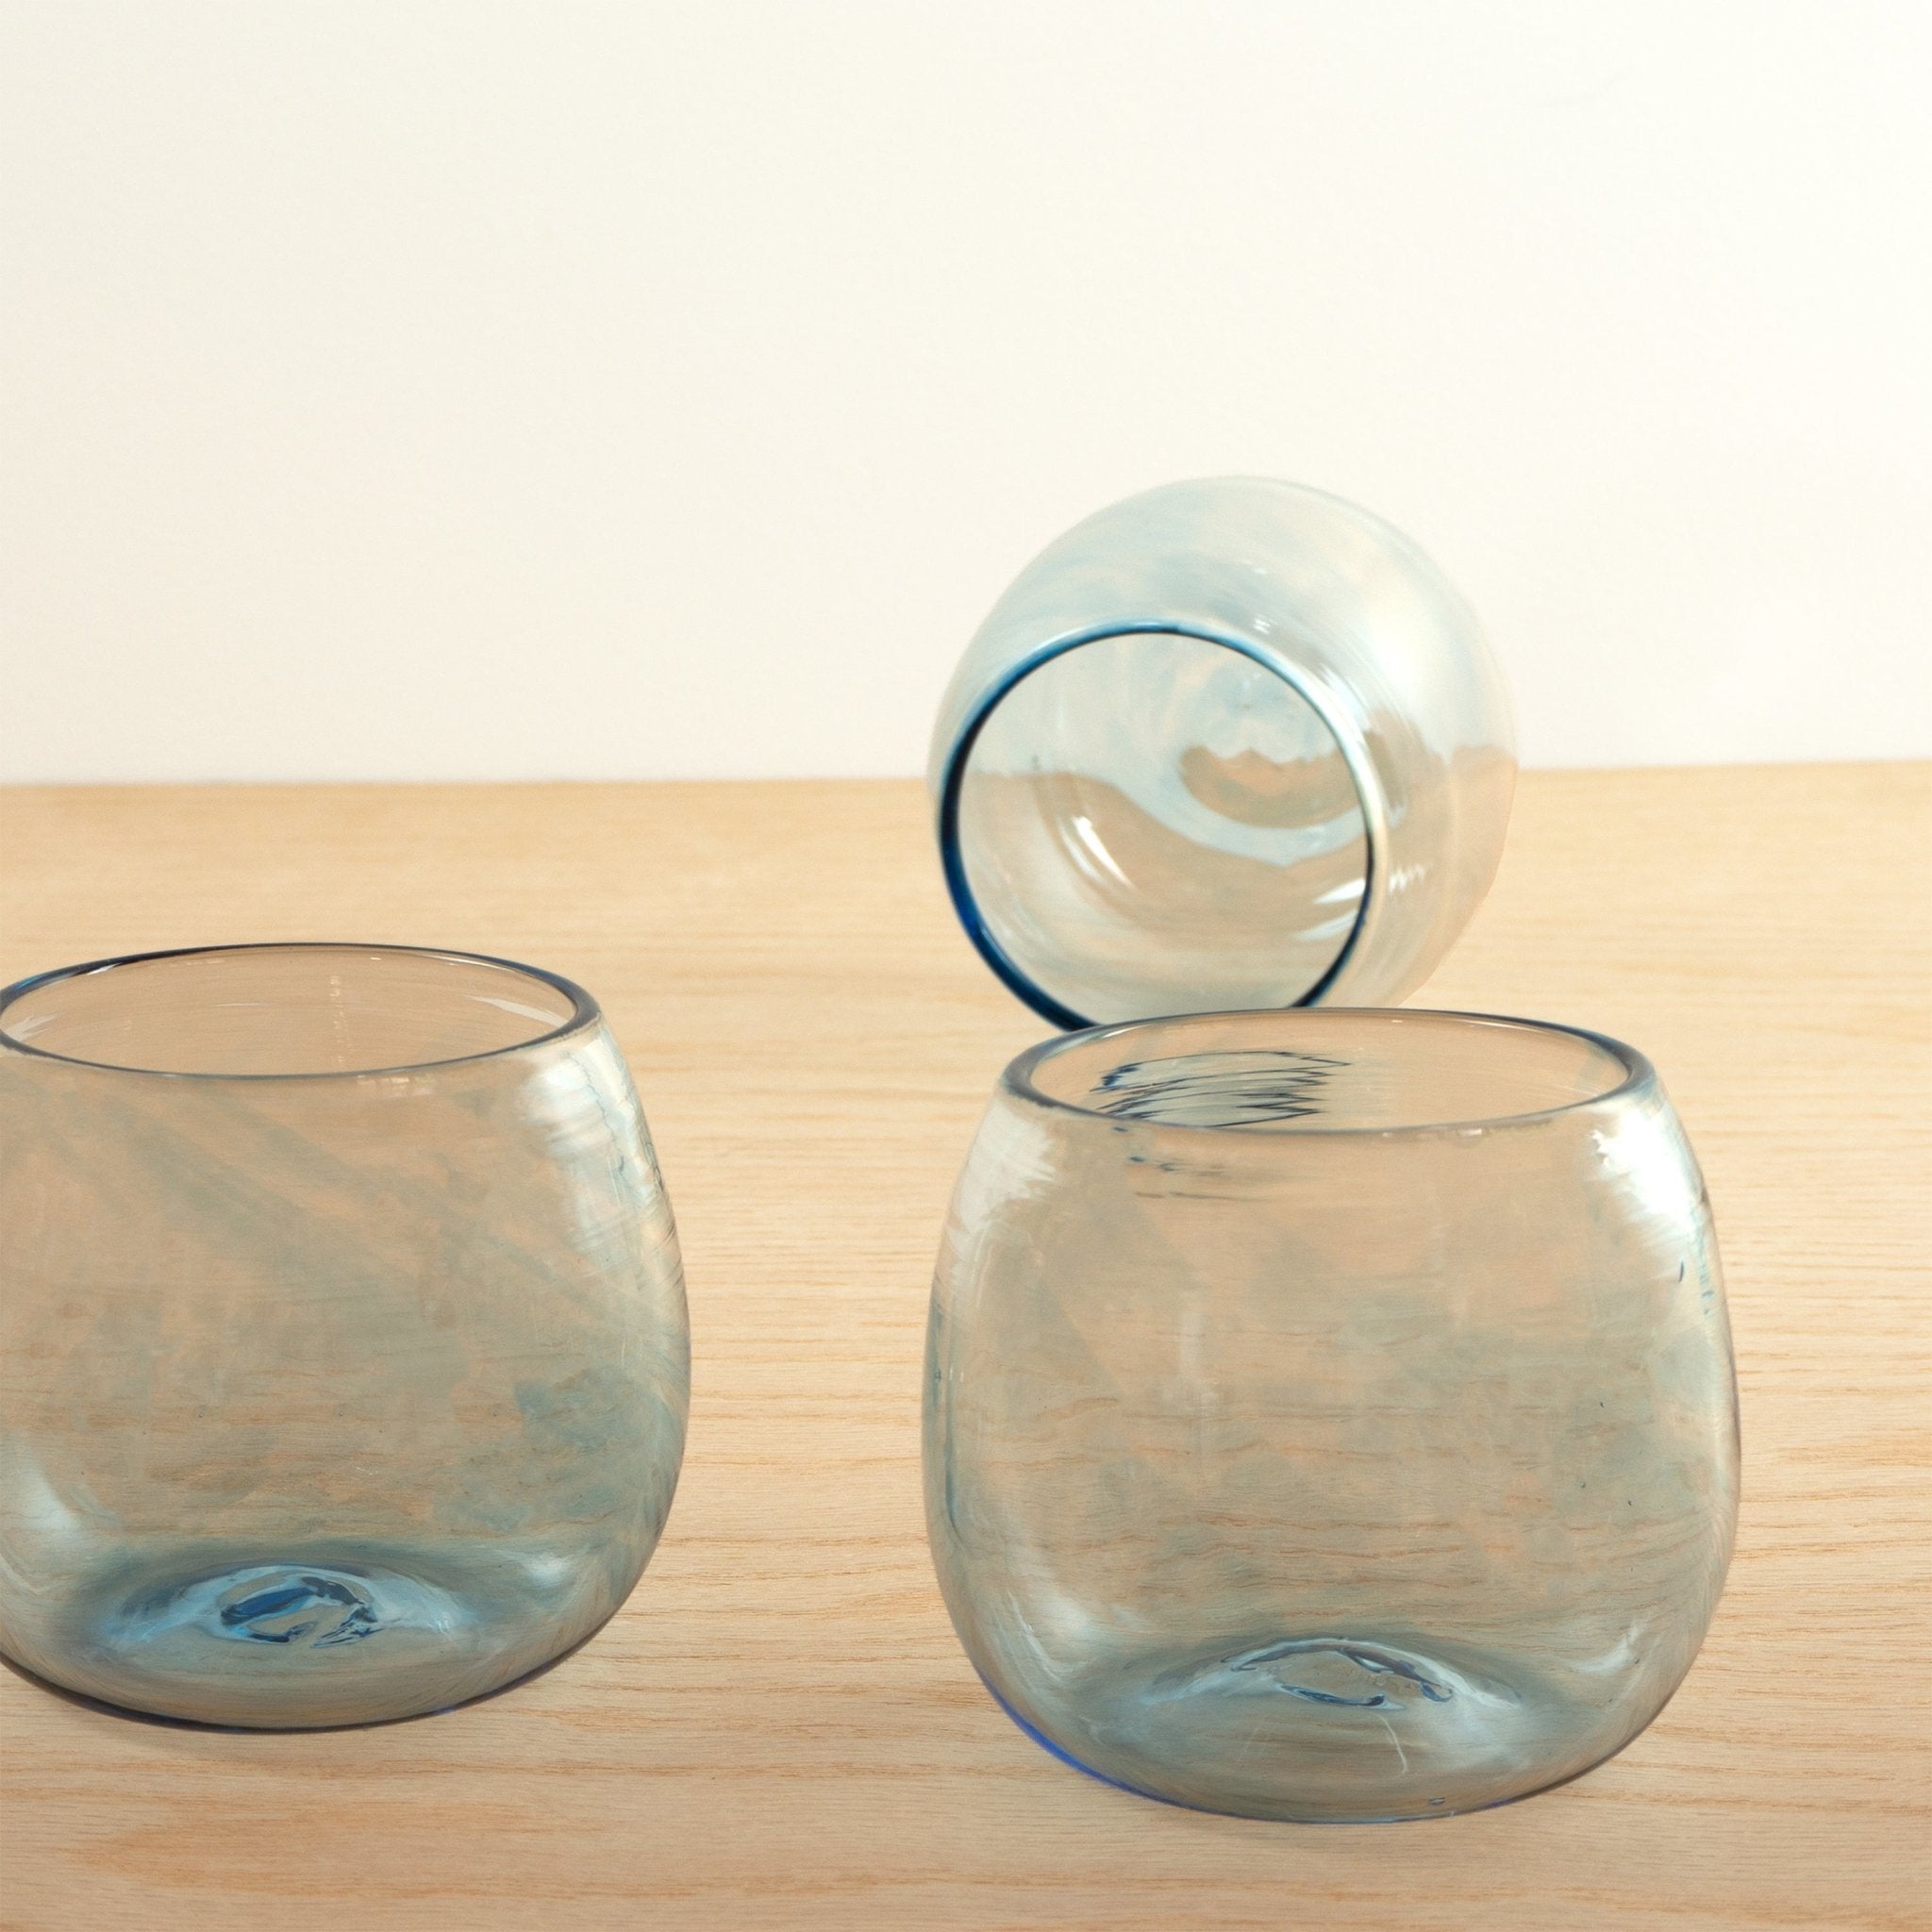 Three blue handblown round glasses from Oaxaca, Mexico arranged on a wooden table